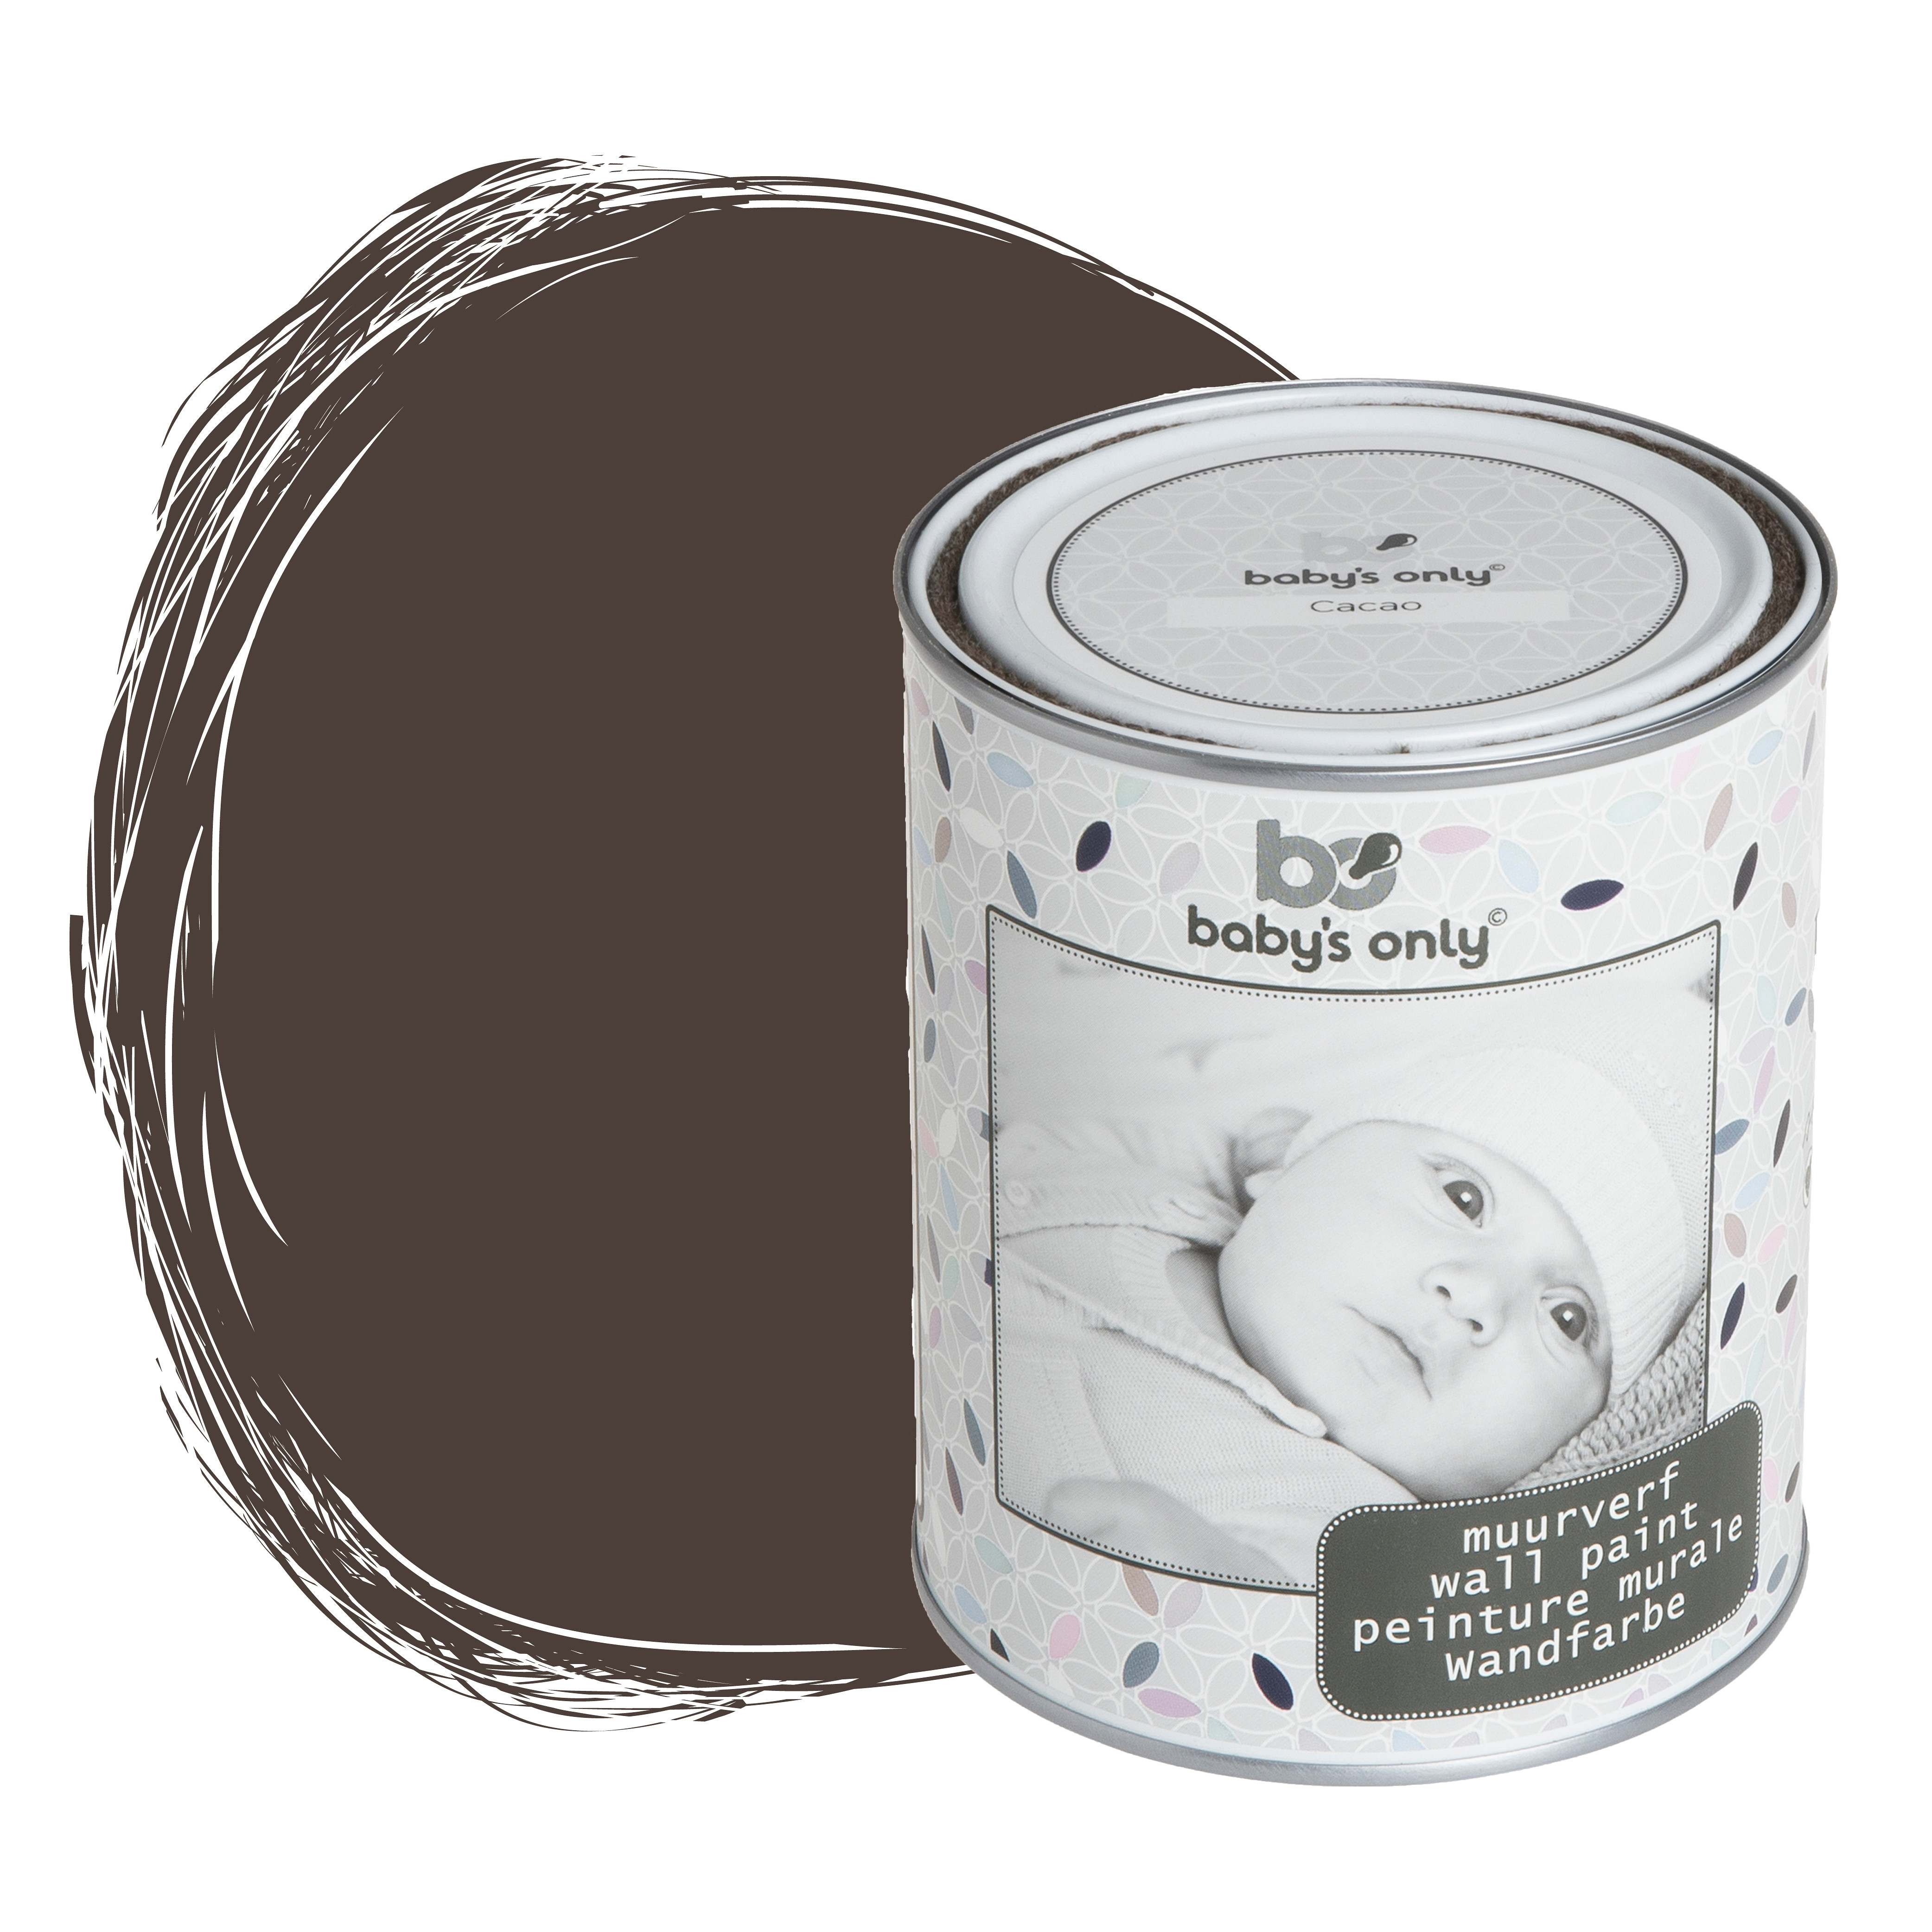 Wall paint cacao - 1 liter